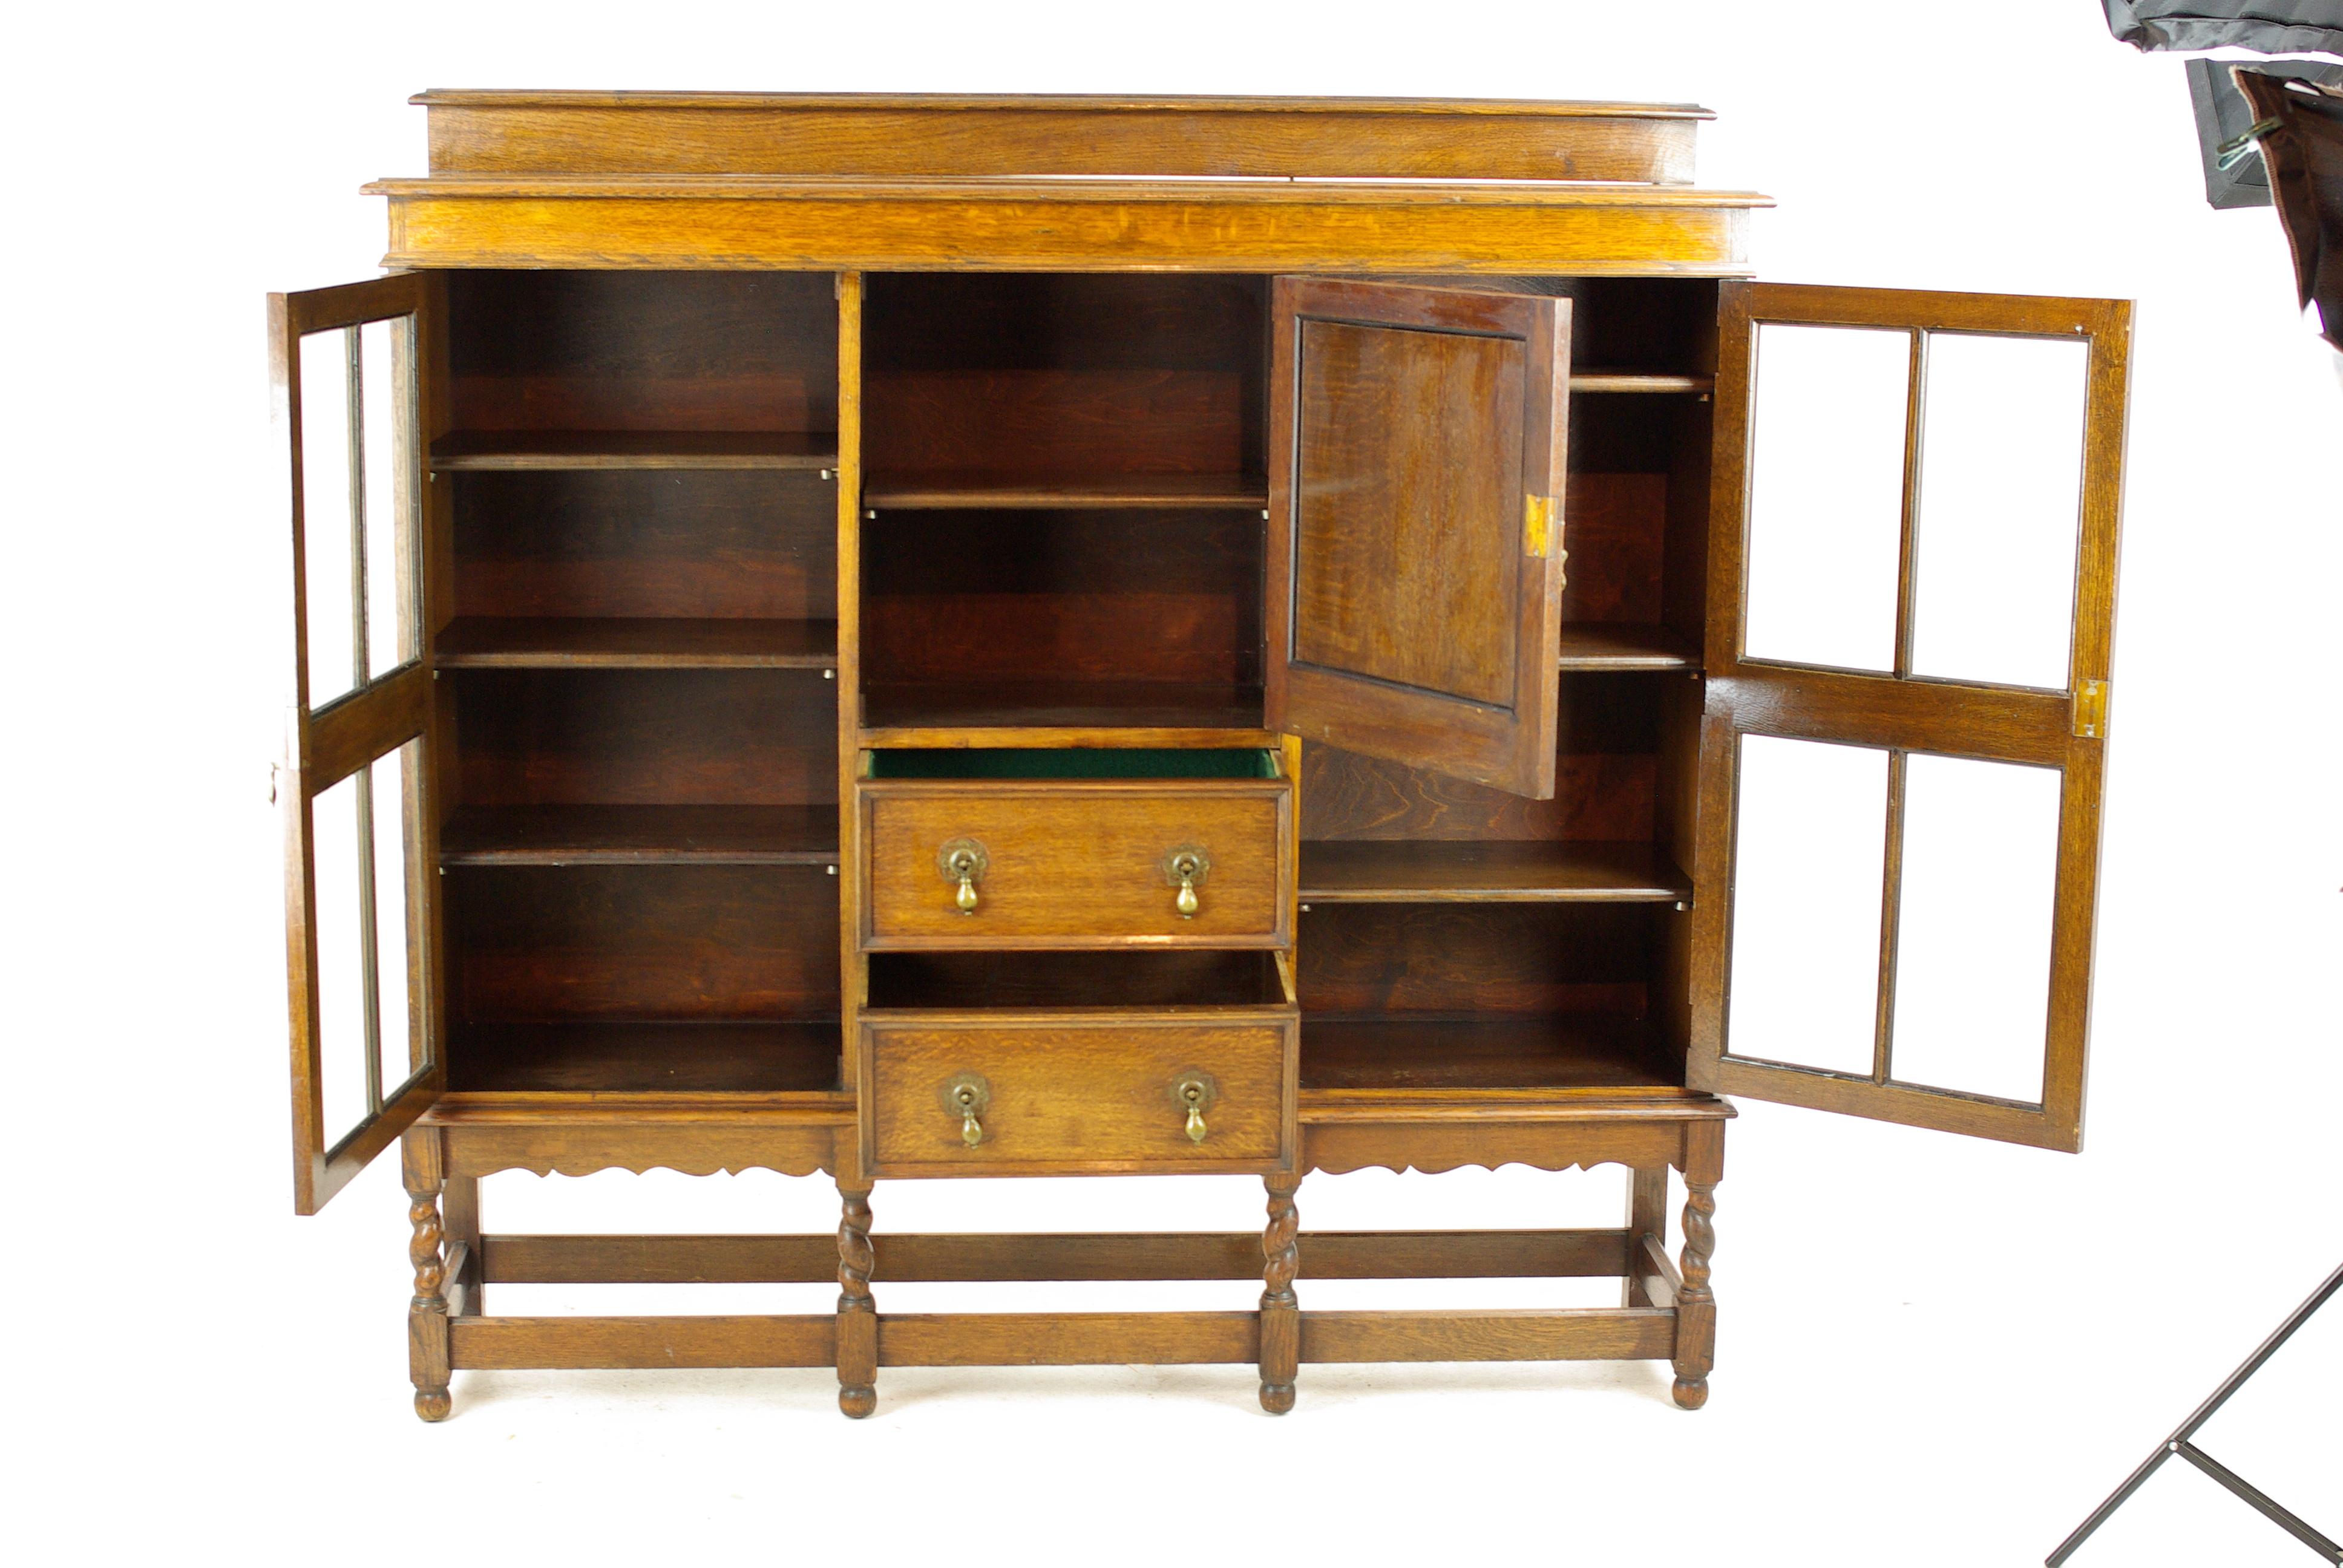 Antique tiger oak bookcase, three-door bookcase, Scotland, 1920, antique furniture, B1236

Scotland, 1920
Moulded ledge back
Rectangular top
Single carved cupboard door with shelf
Pair of dovetailed drawers below with original brass